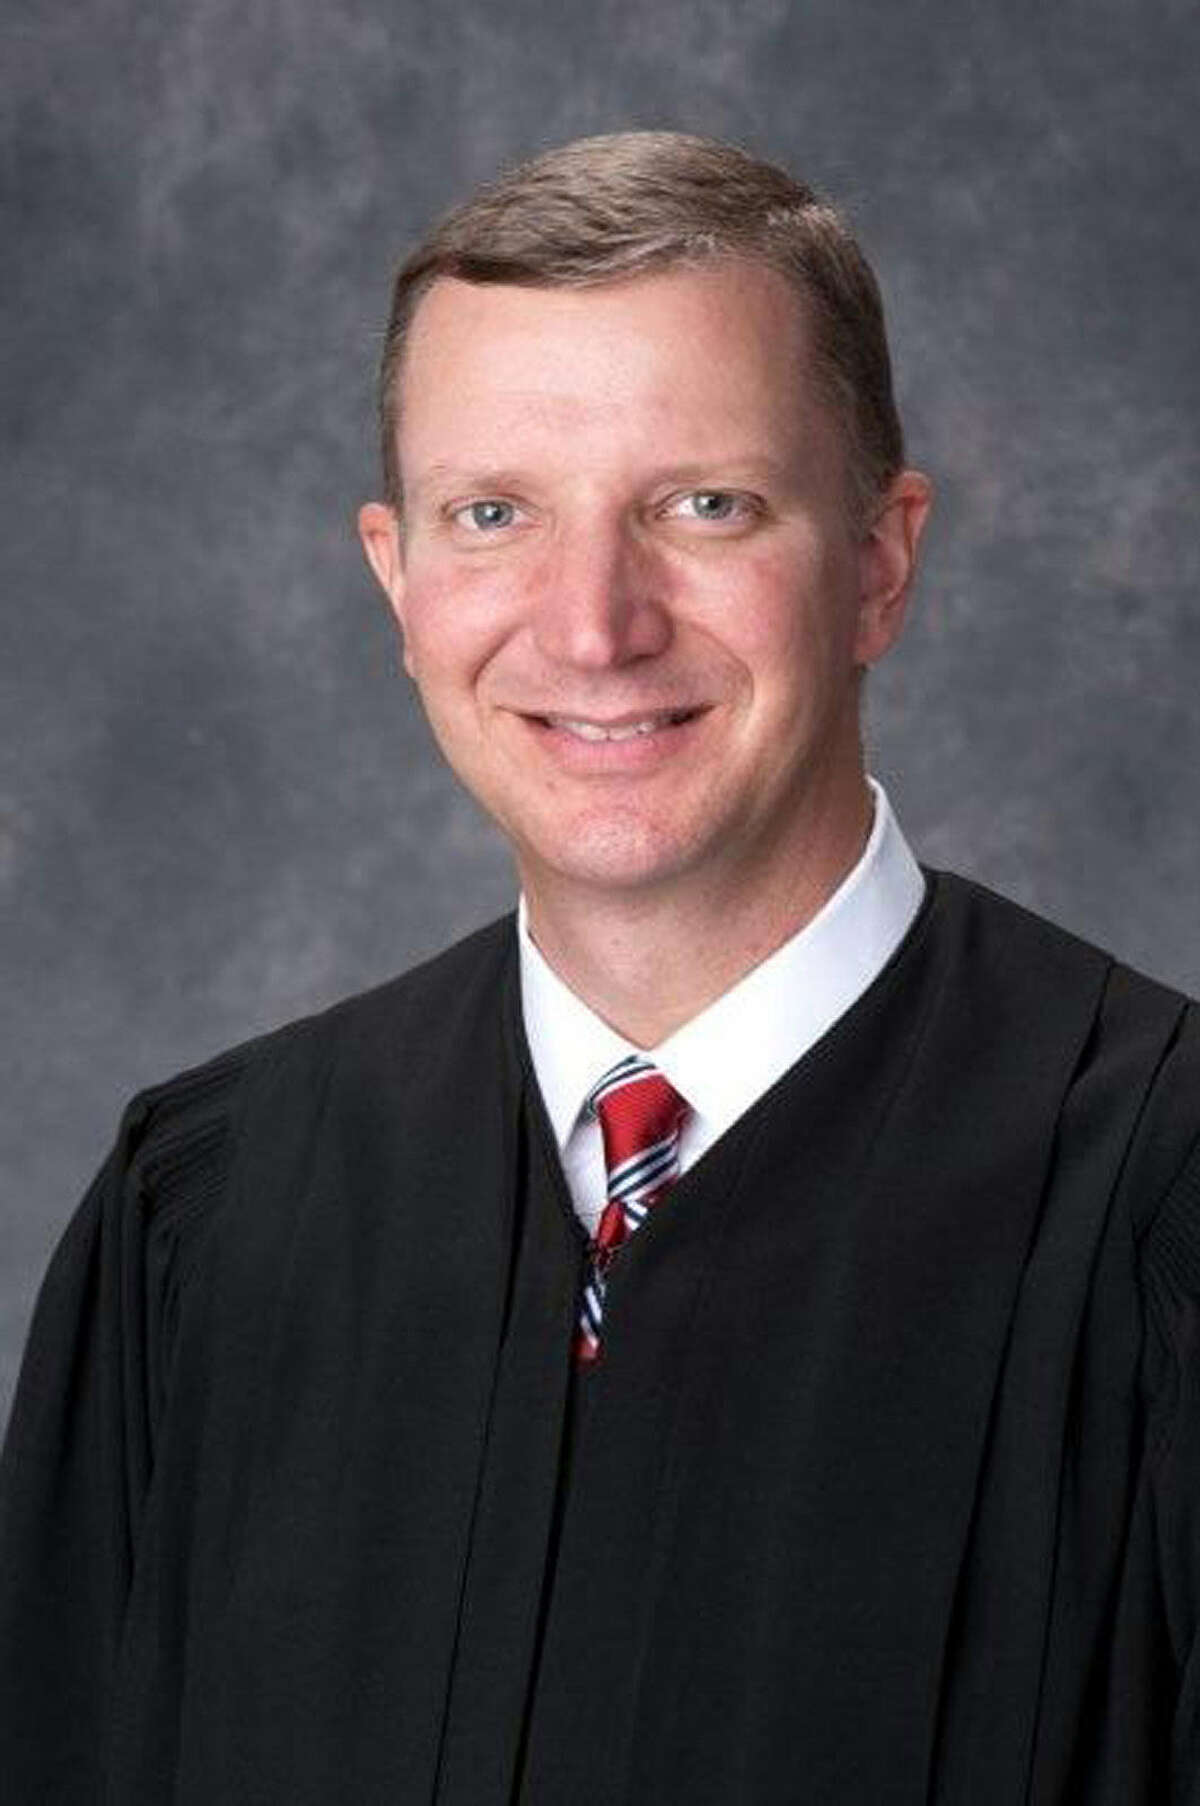 Jeff Brown will occupy the spot vacated by Justice Nathan Hecht, who ascended to chief justice.